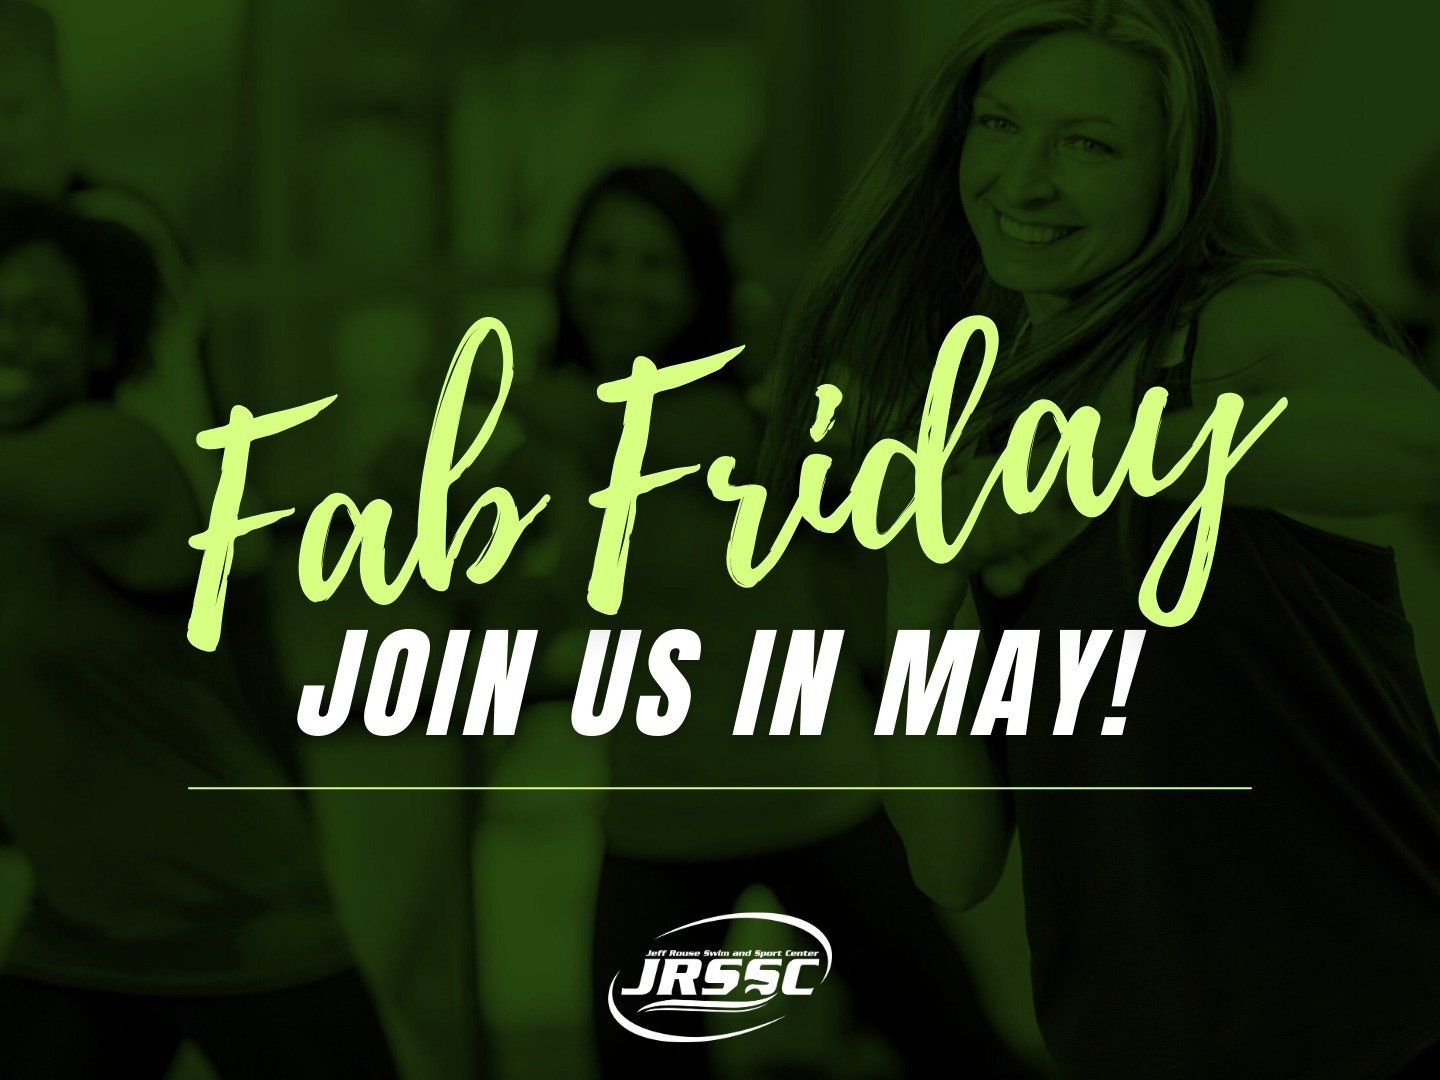 Check out May's Fab Friday classes!
💪 5/3 - Zumba &amp; STRONG 30 @ 5P with Renee
🚲 5/10 - Grunge Bike Ride @ 5P with Michelle B
🧘&zwj;♀️ 5/17 - Yoga @ 5P with Michelle M
​🙃 5/31 - Inversions @ 5P with Kristina

Discover a new perspective of life